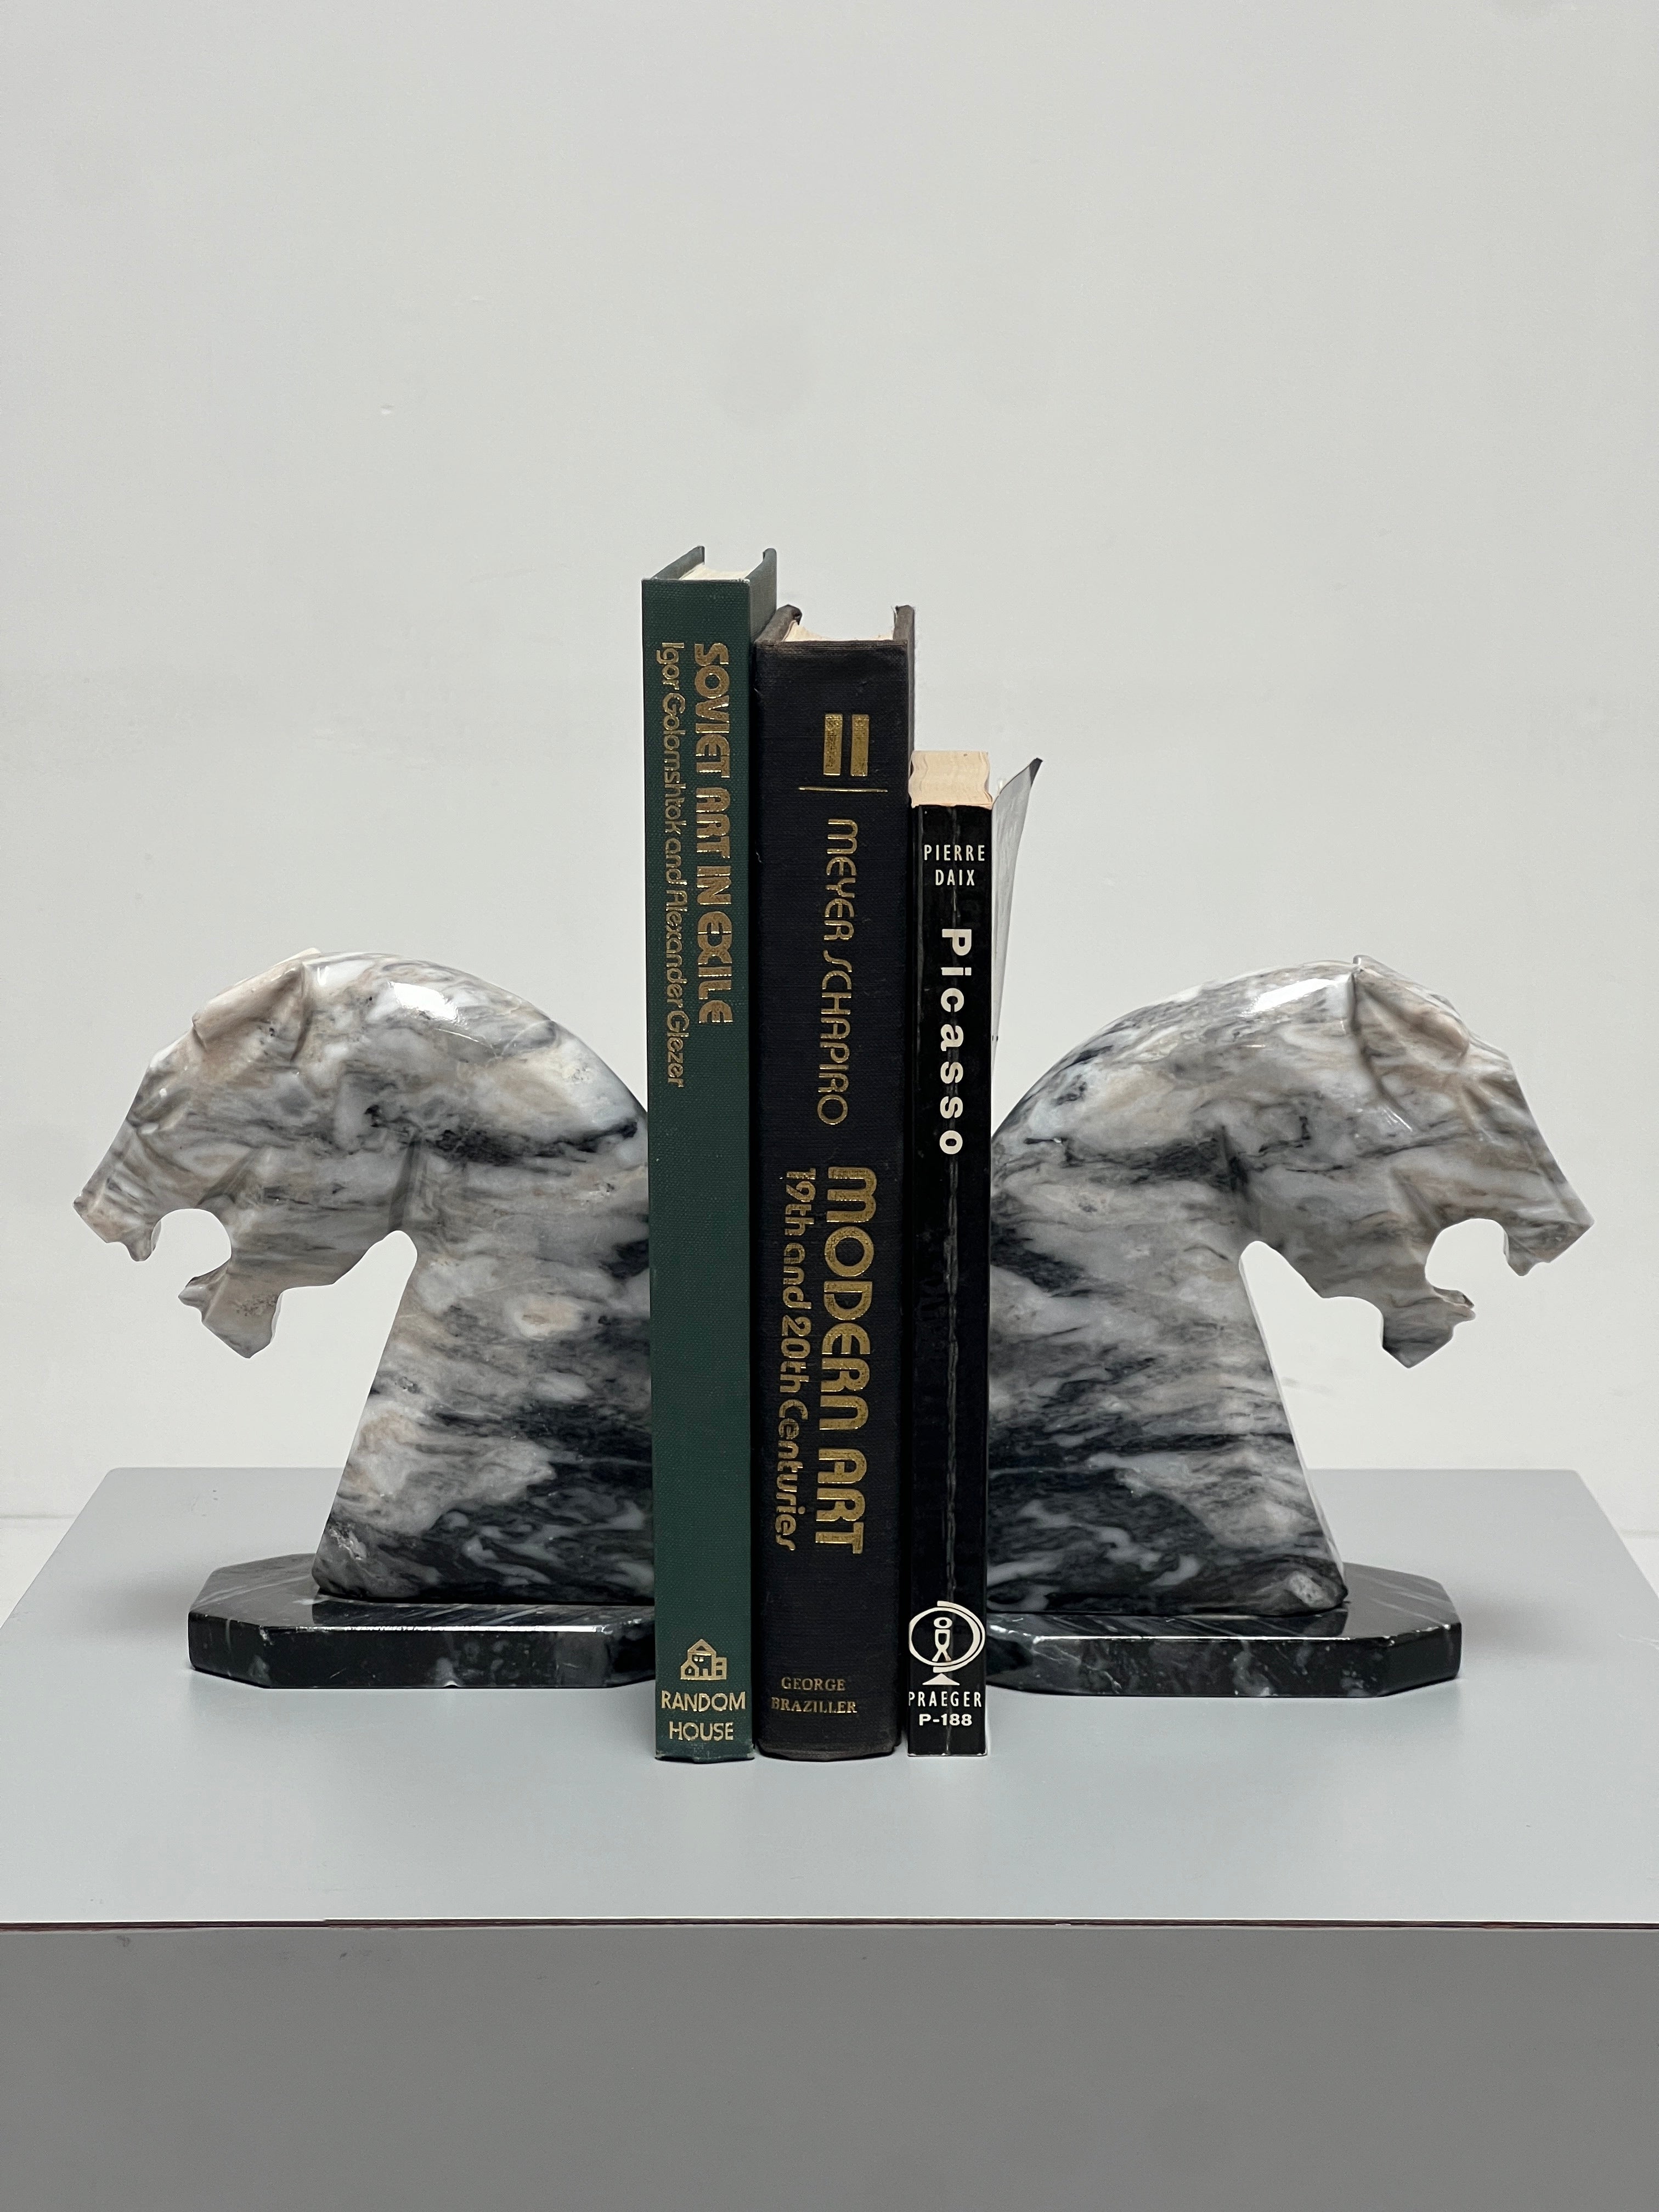 Marble Bookends